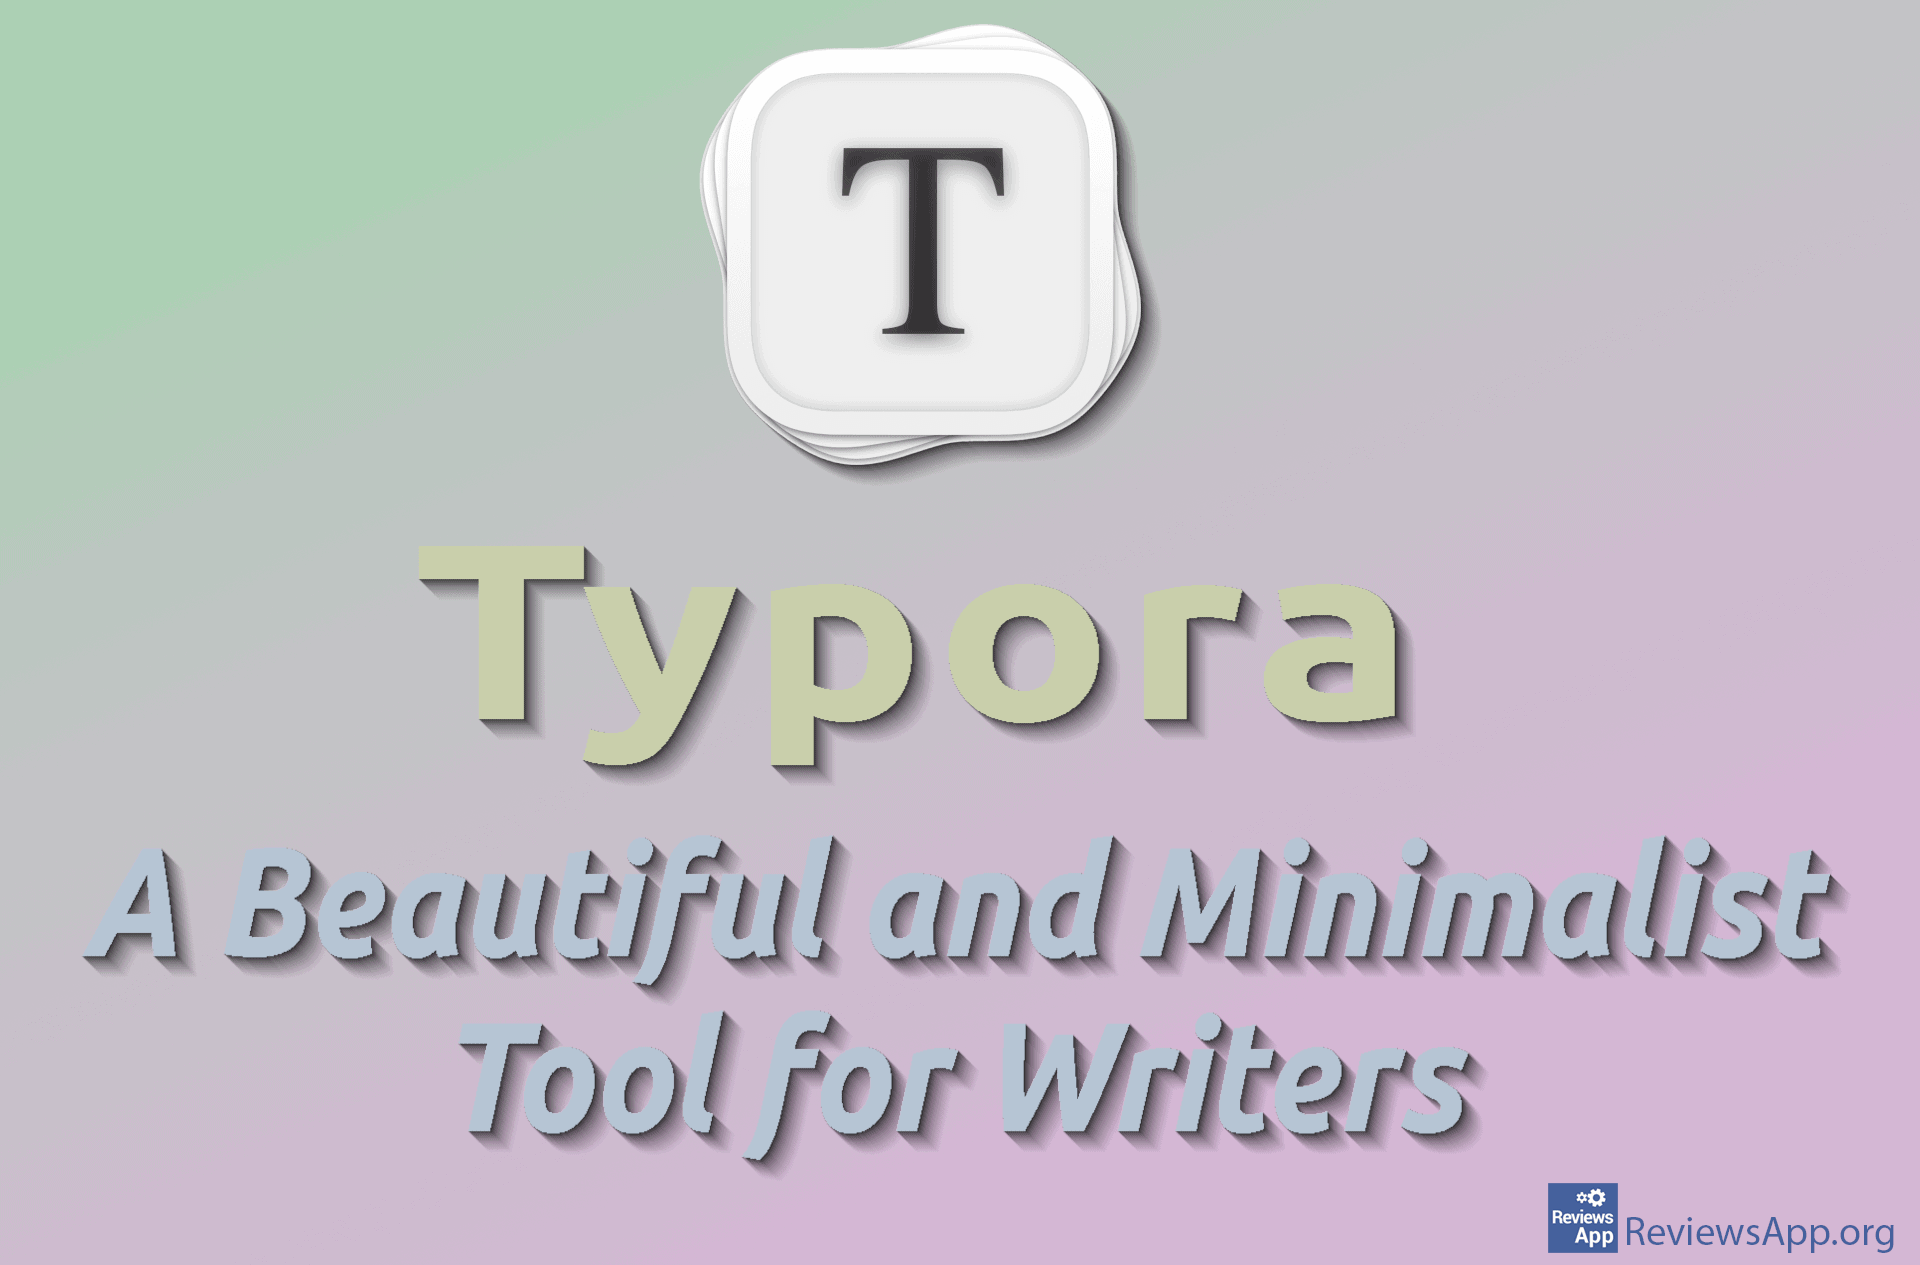 Typora – A Beautiful and Minimalist Tool for Writers